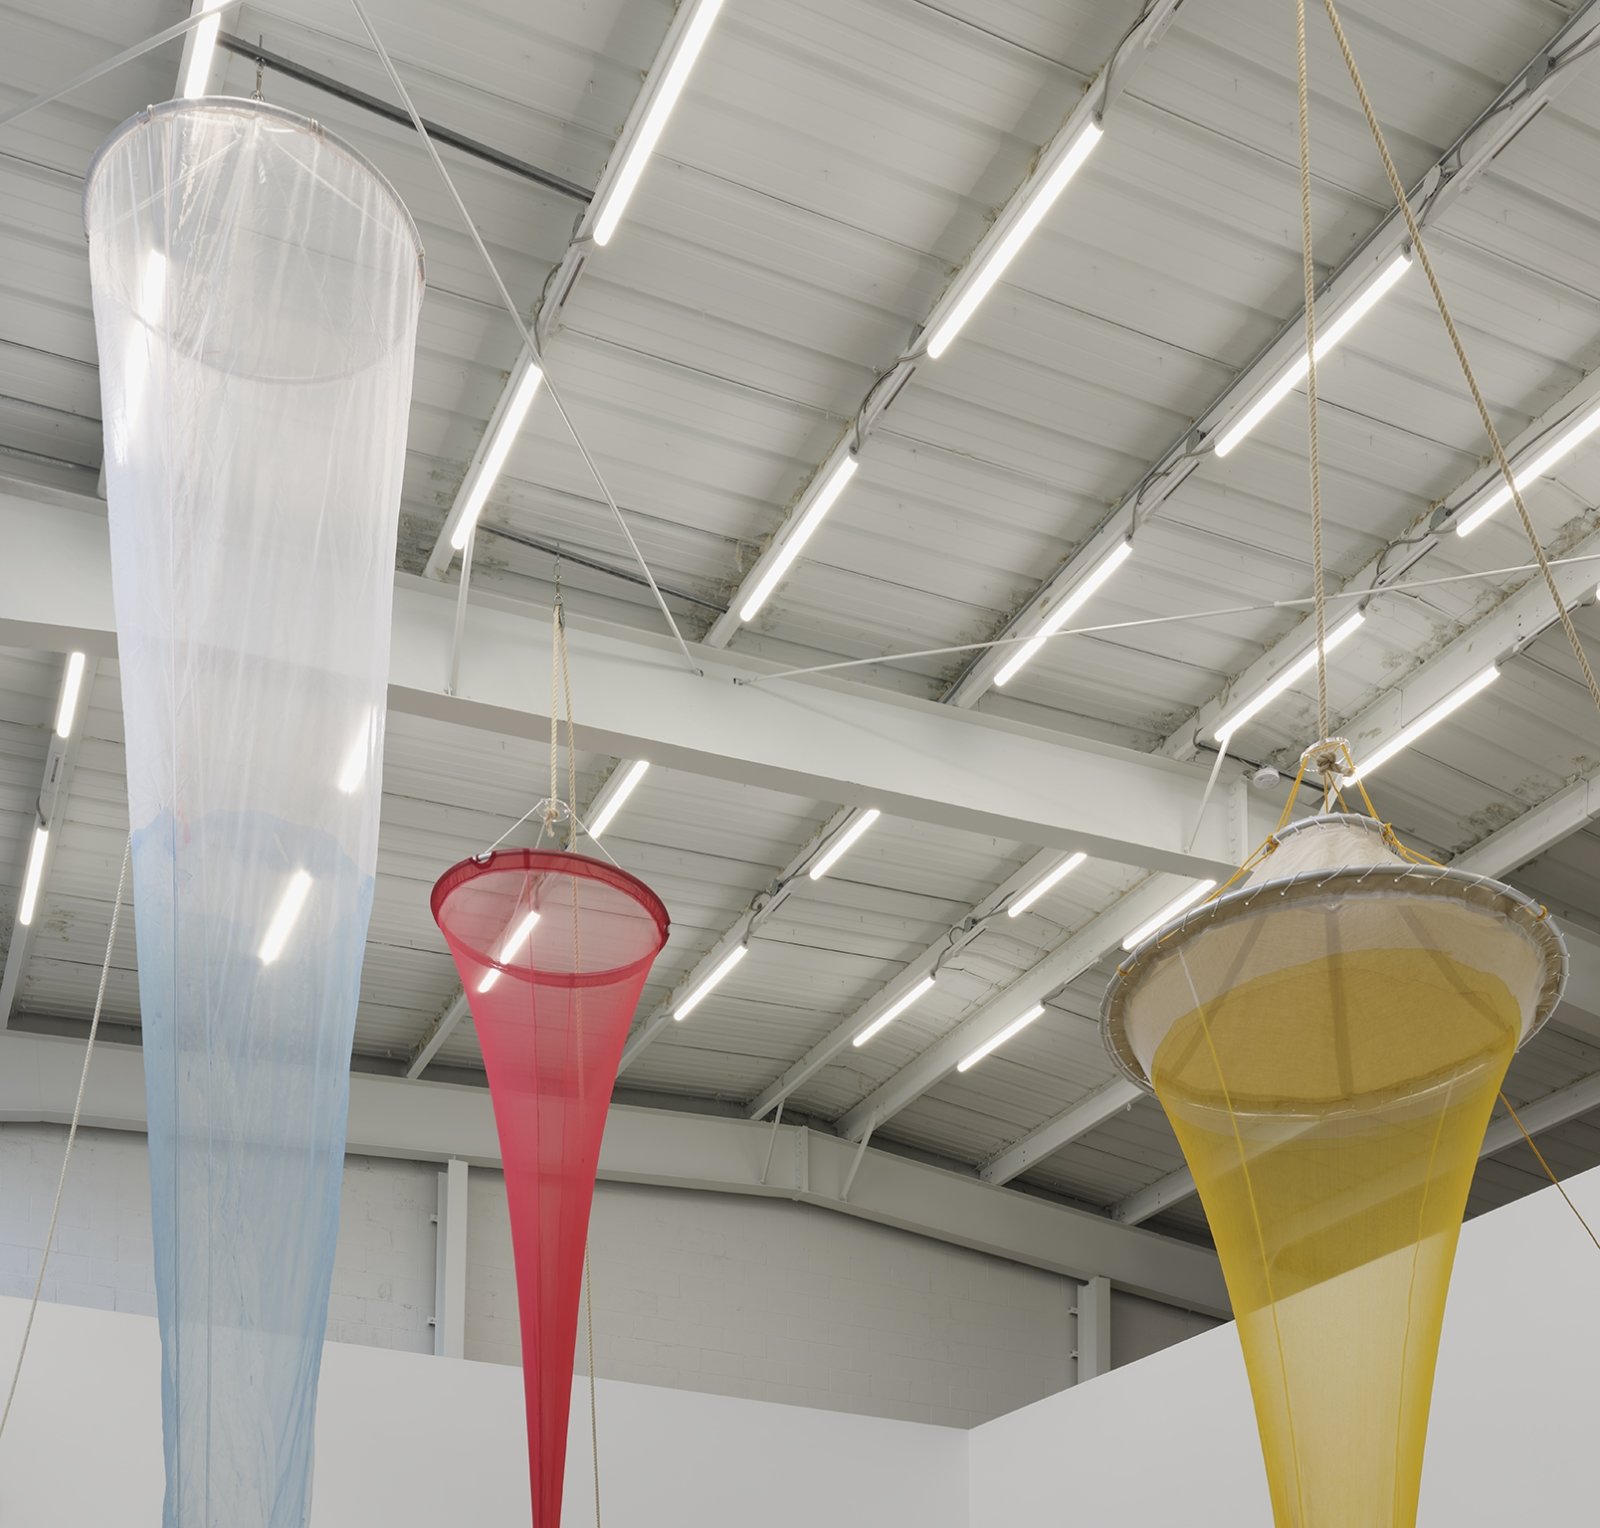 Christina Mackie, Colour Drop, 2014, silk, linen, polyester, aluminum, acrylic, manila, sisal, galvanized steel, fibreglass, gel-coated fibreglass, non-toxic water-based dye, water, worked glass, installation dimensions variable